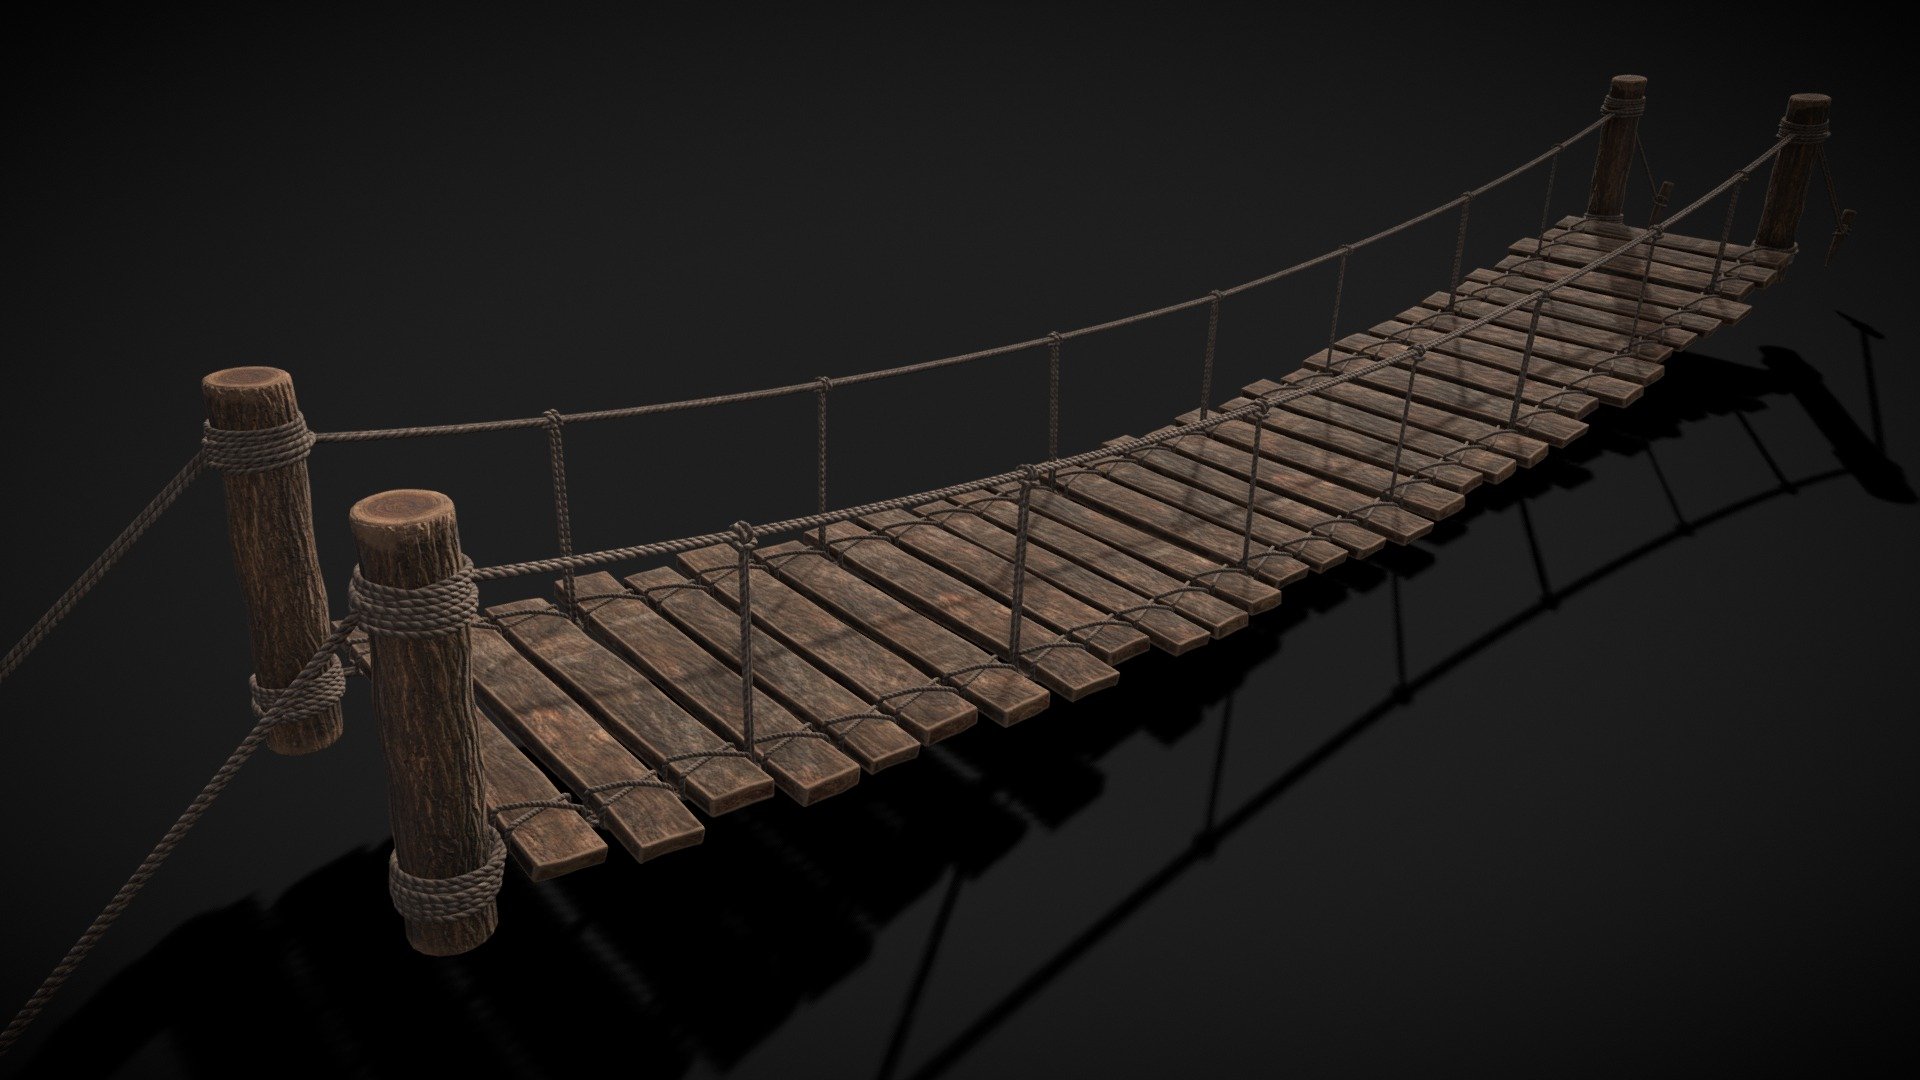 Rustic_Wooden_Rope_Bridge_FBX
VR / AR / Low-poly
PBR approved
Geometry Polygon mesh
Polygons 87,090
Vertices 91,868
Textures 4K PNG - Rustic Wooden Rope Bridge - Buy Royalty Free 3D model by GetDeadEntertainment 3d model